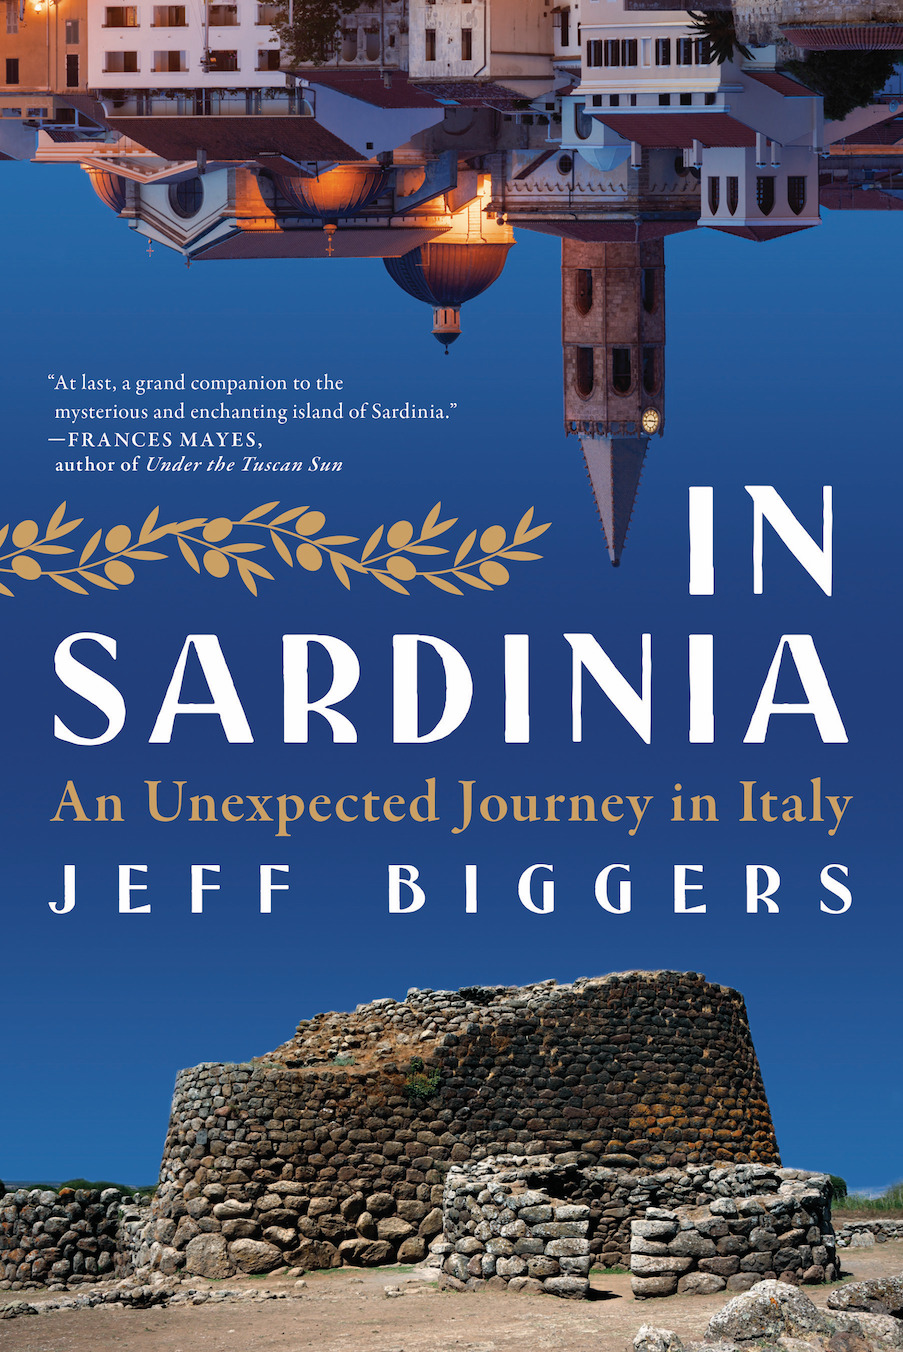 Book Launch: In Sardinia by Jeff Biggers in conversation with Alessandro Nivola